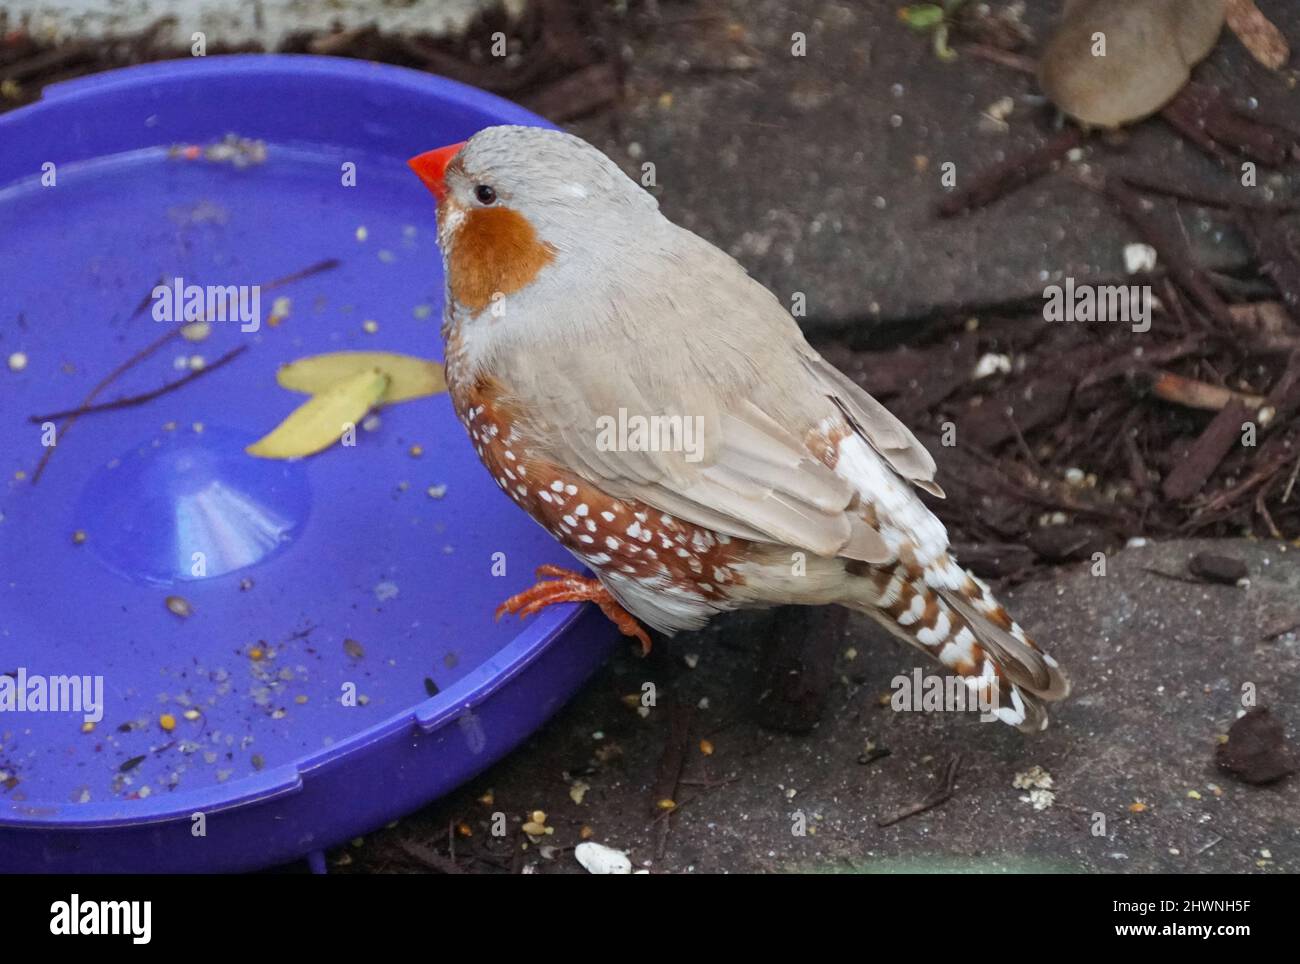 A red-faced Finchwith brown feathers perching on a food container Stock Photo